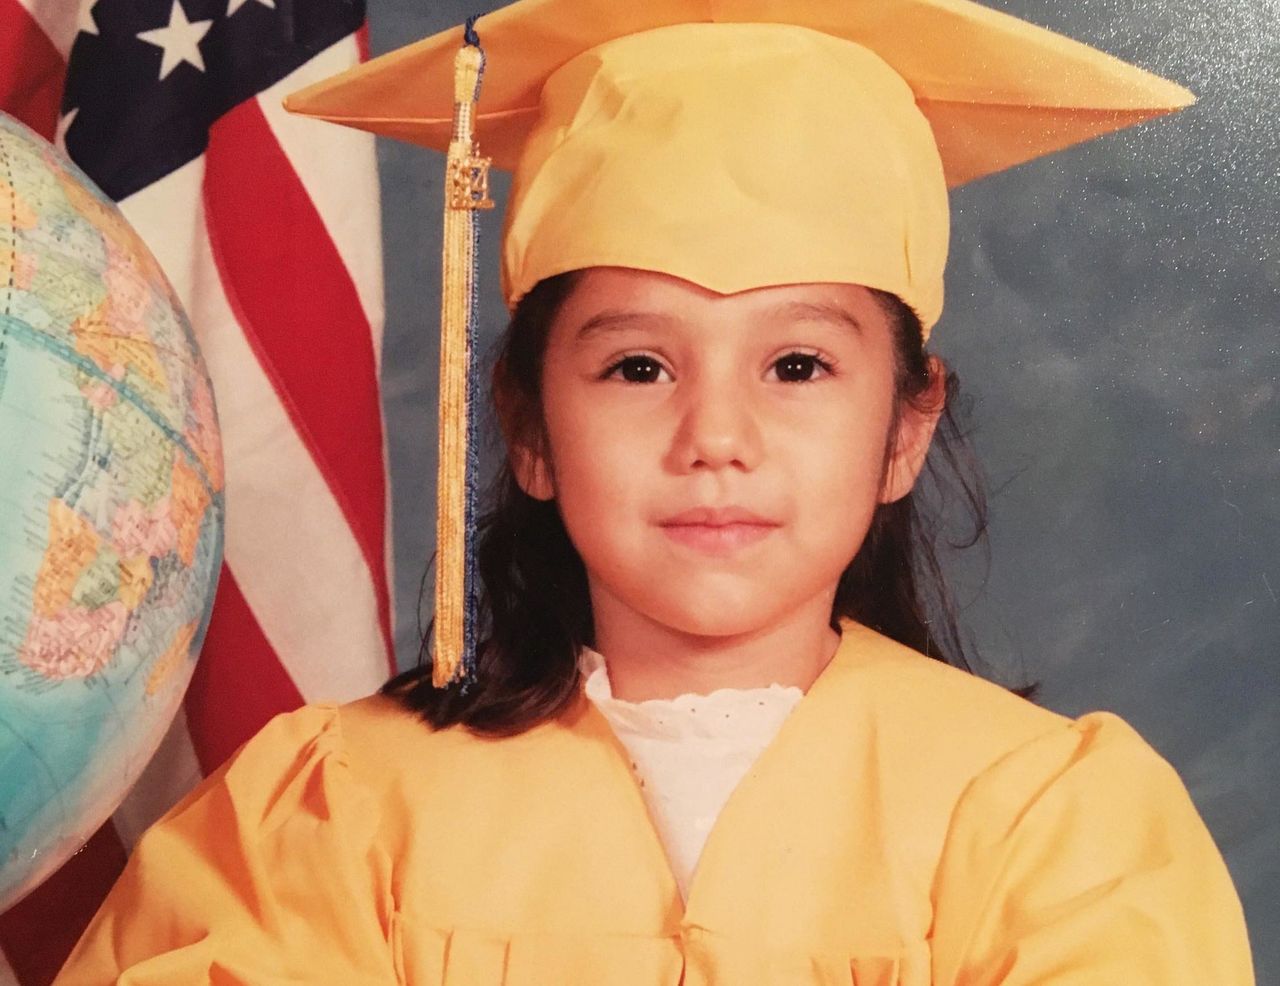 Norma, age 5, poses for her kindergarten graduation photo.